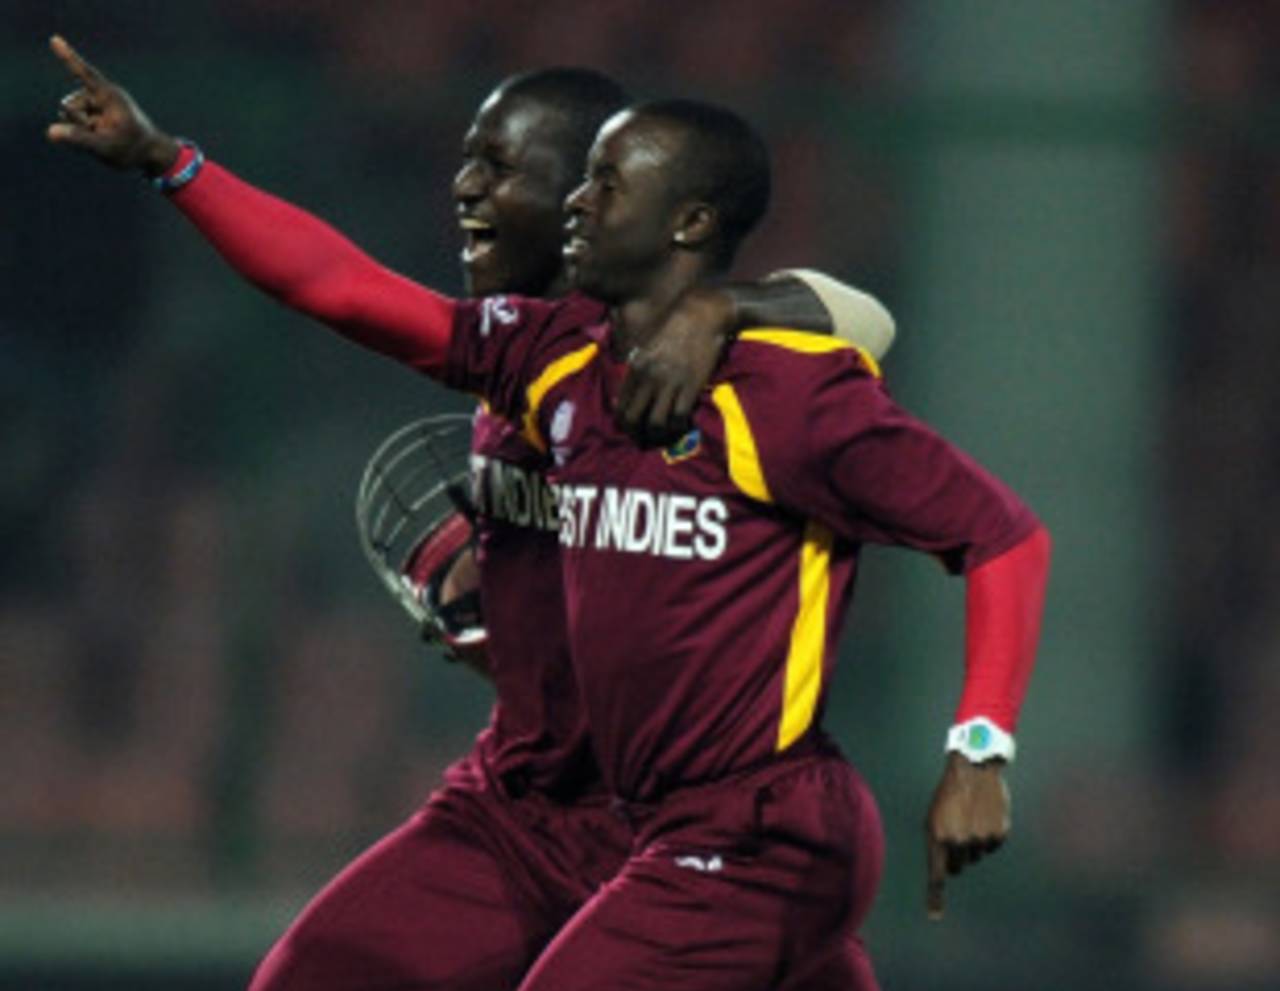 Kemar Roach is thrilled after picking up a hat-trick, Netherlands v West Indies, Group B, World Cup 2011, Delhi, February 28, 2011